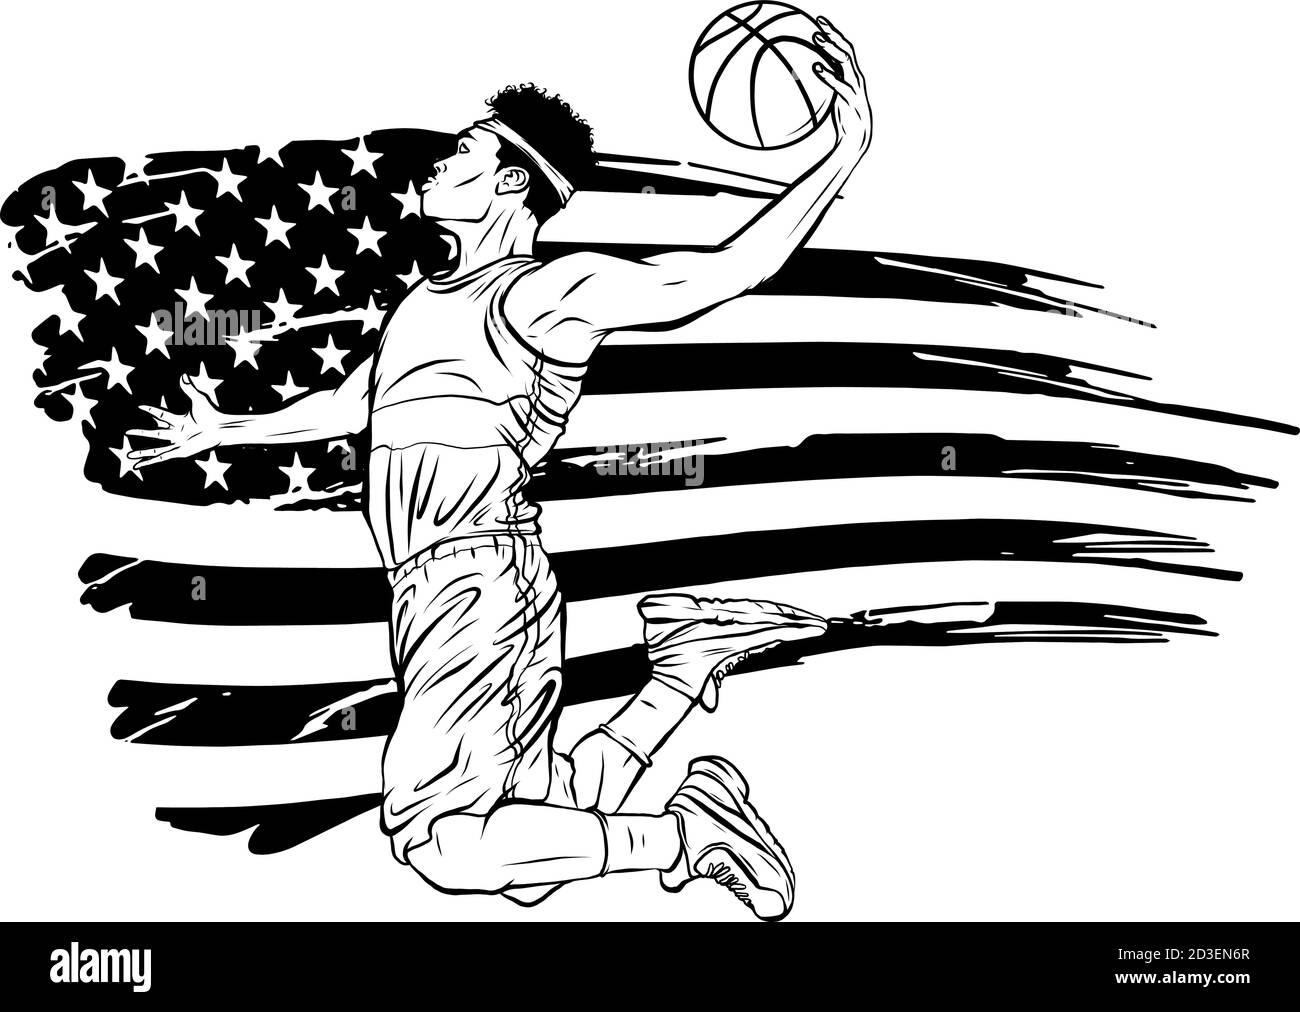 Sports Outline Clipart-cute boy bouncing a basketball with one hand black  outline clipa